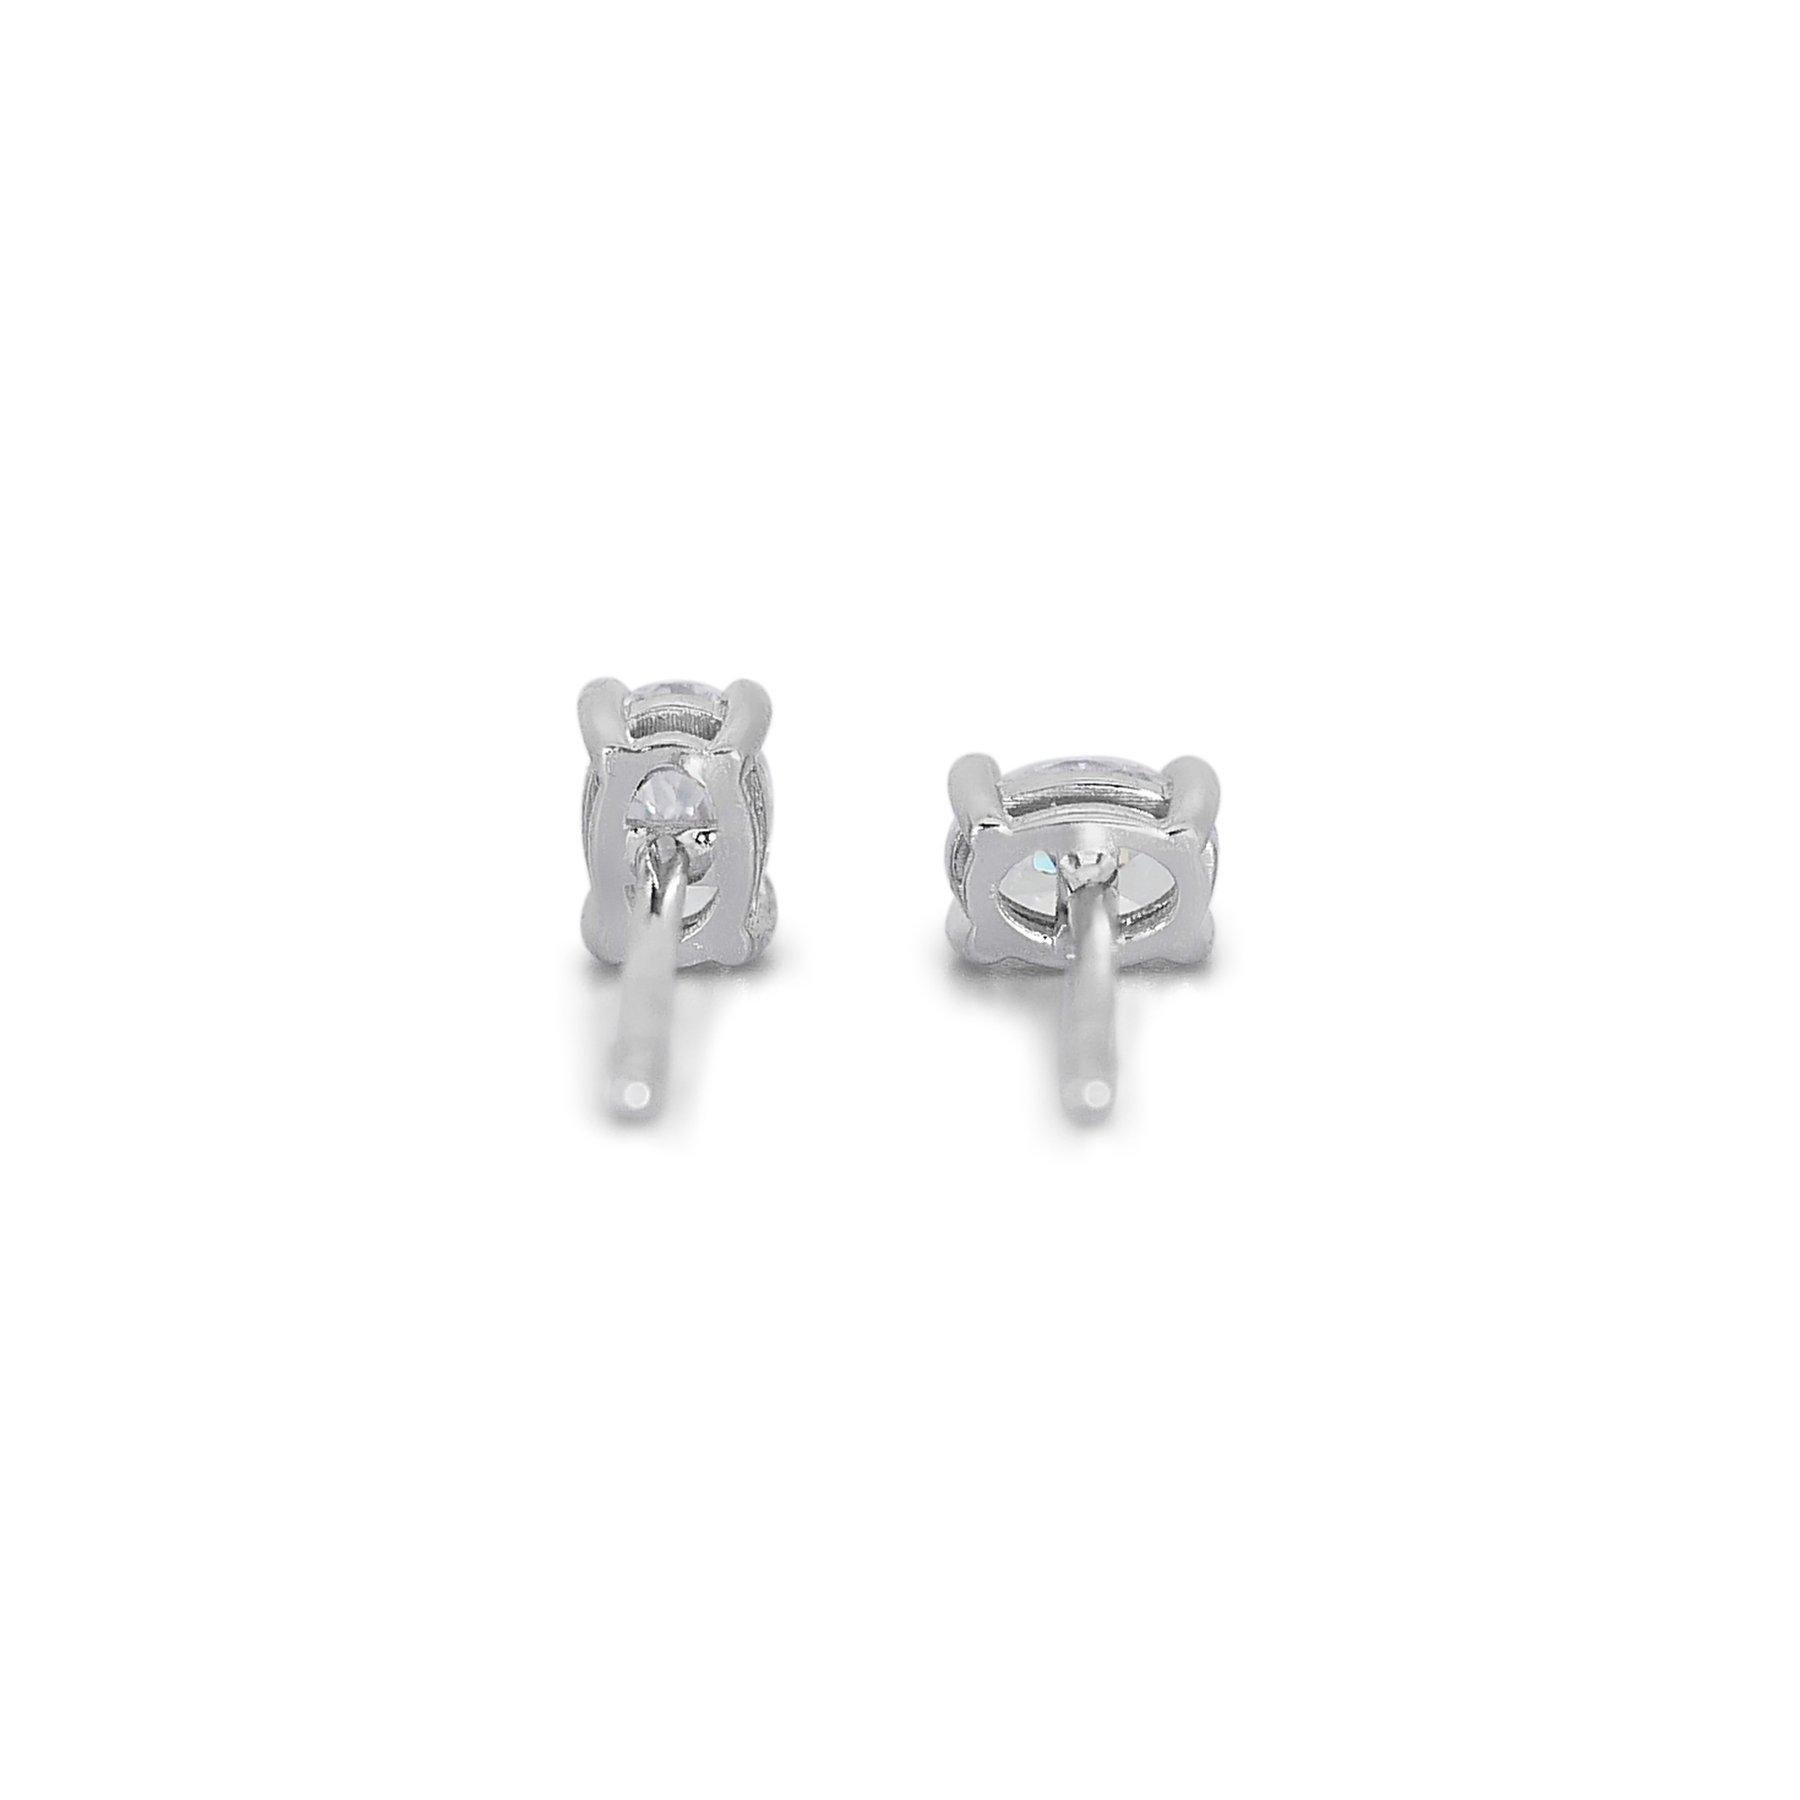 Exquisite 1.40ct Oval Diamond Stud Earrings in 18k White Gold - GIA Certified For Sale 2